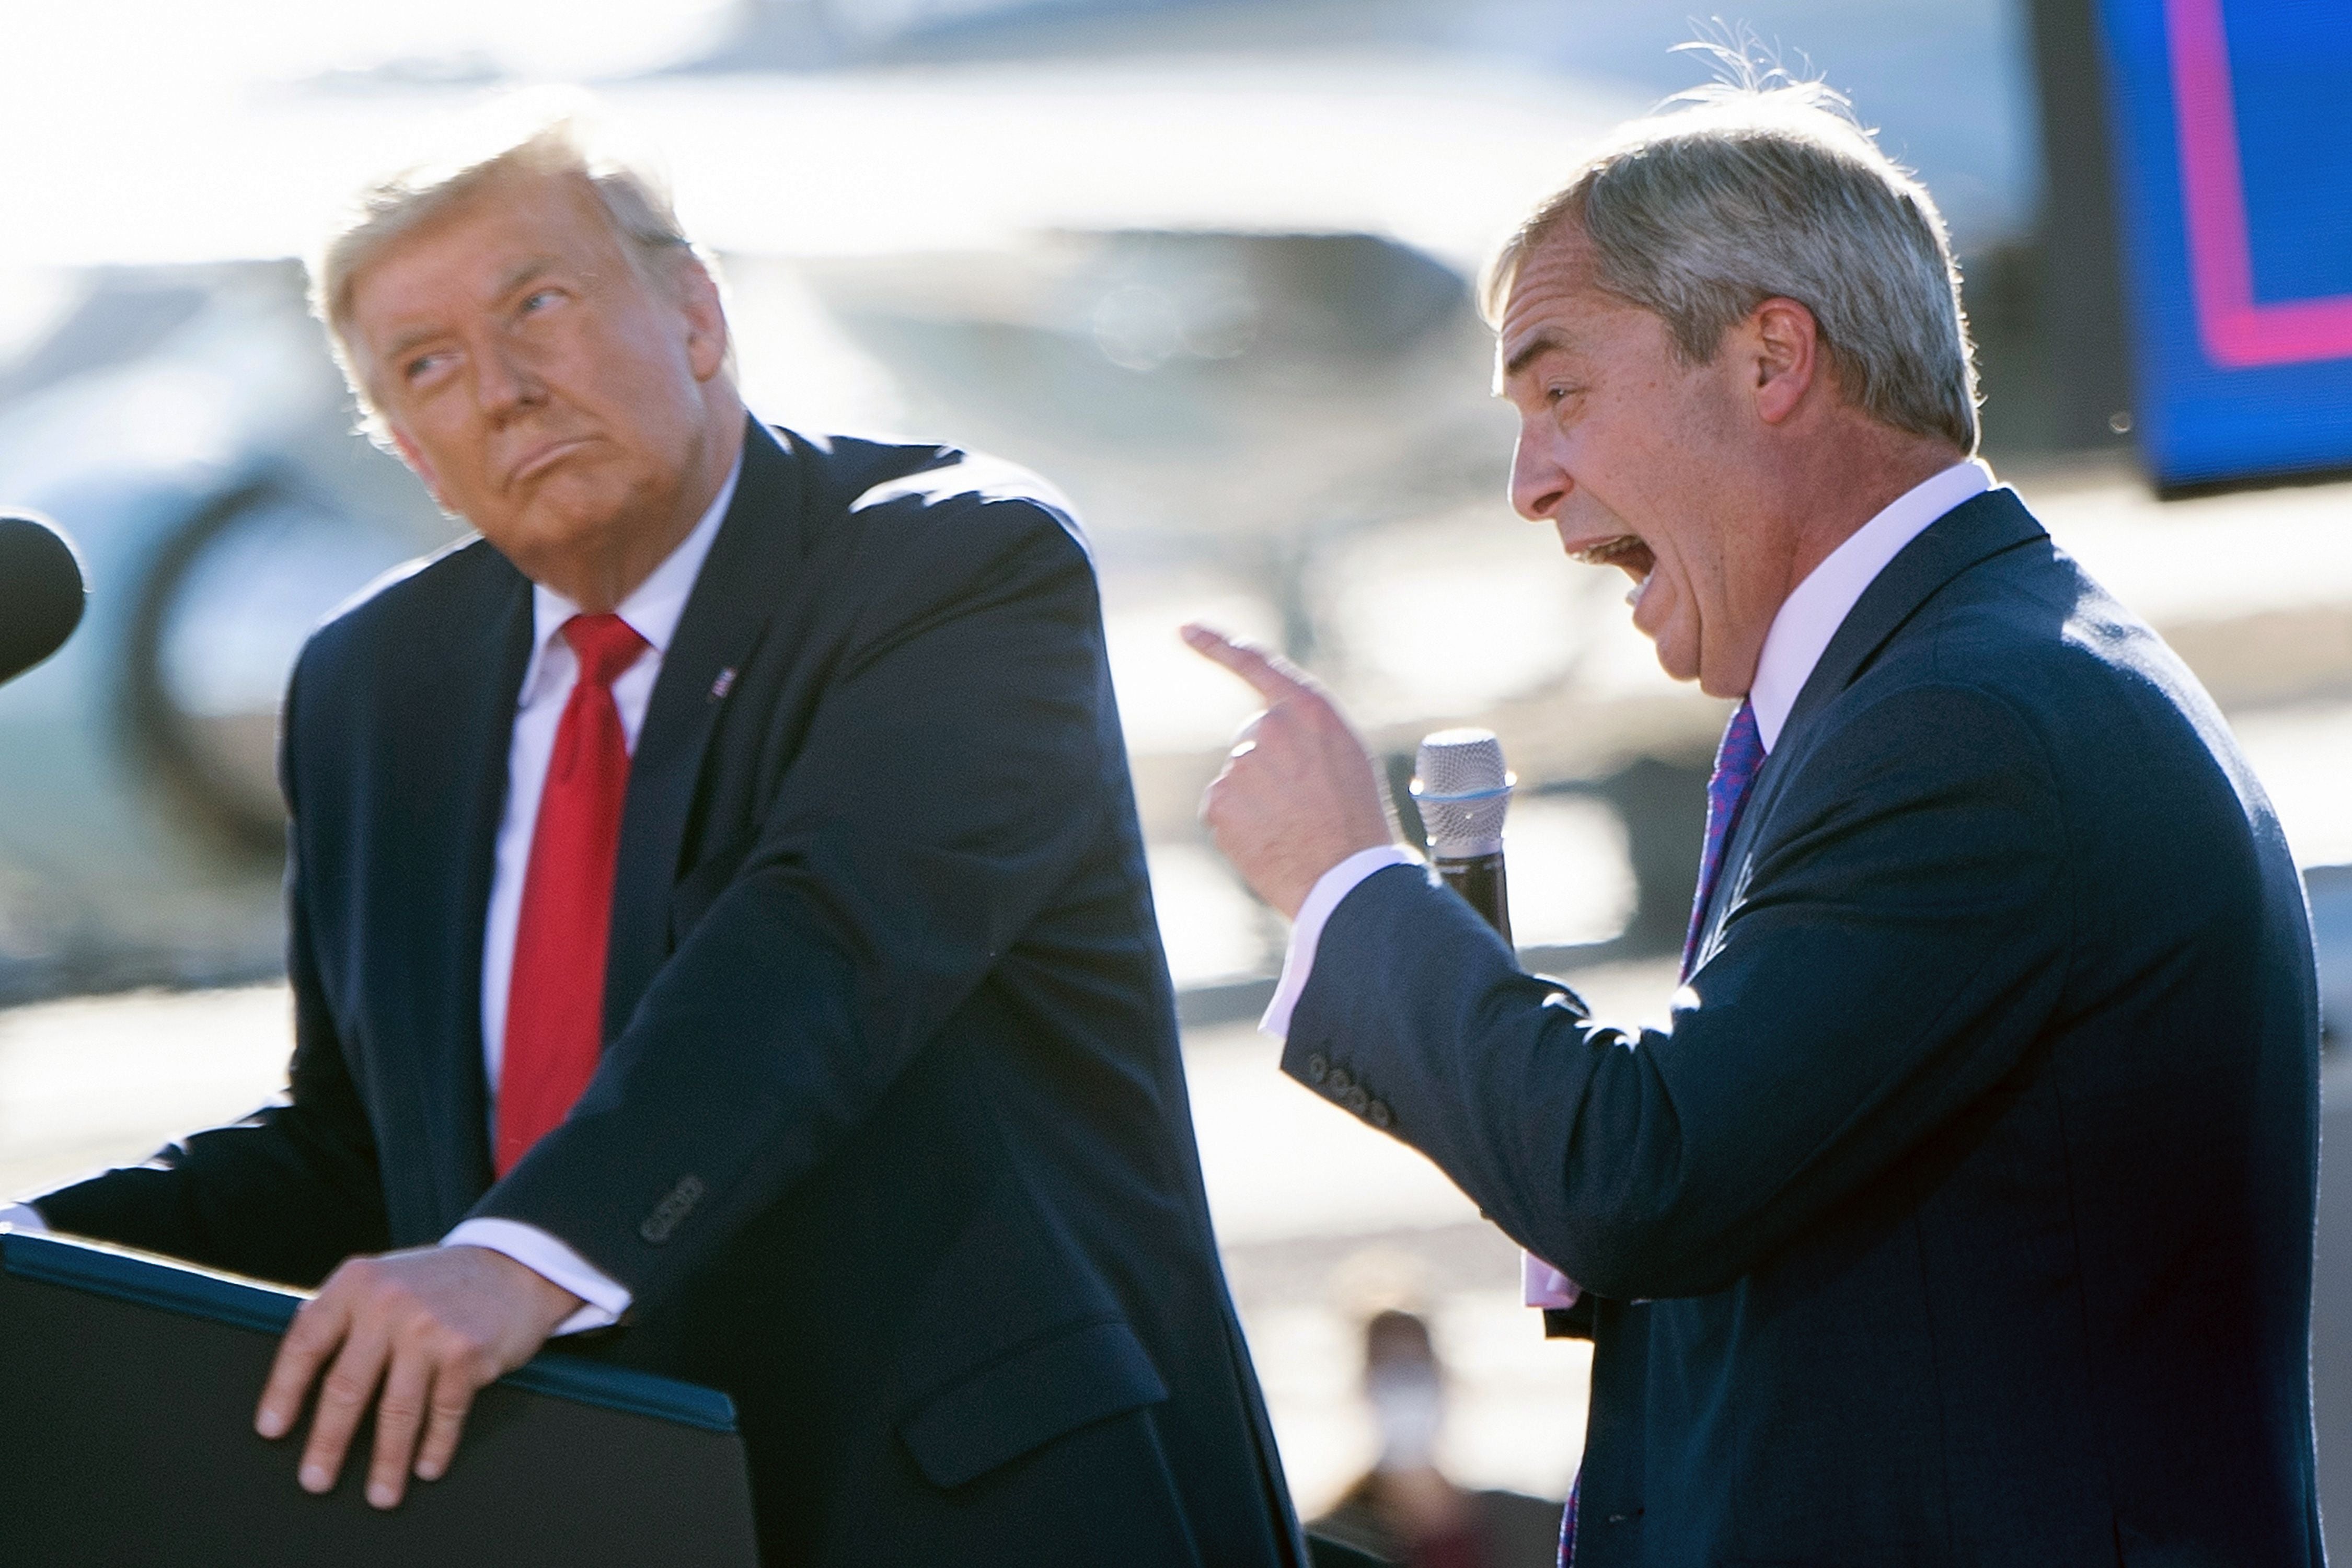 Farage with Donald Trump